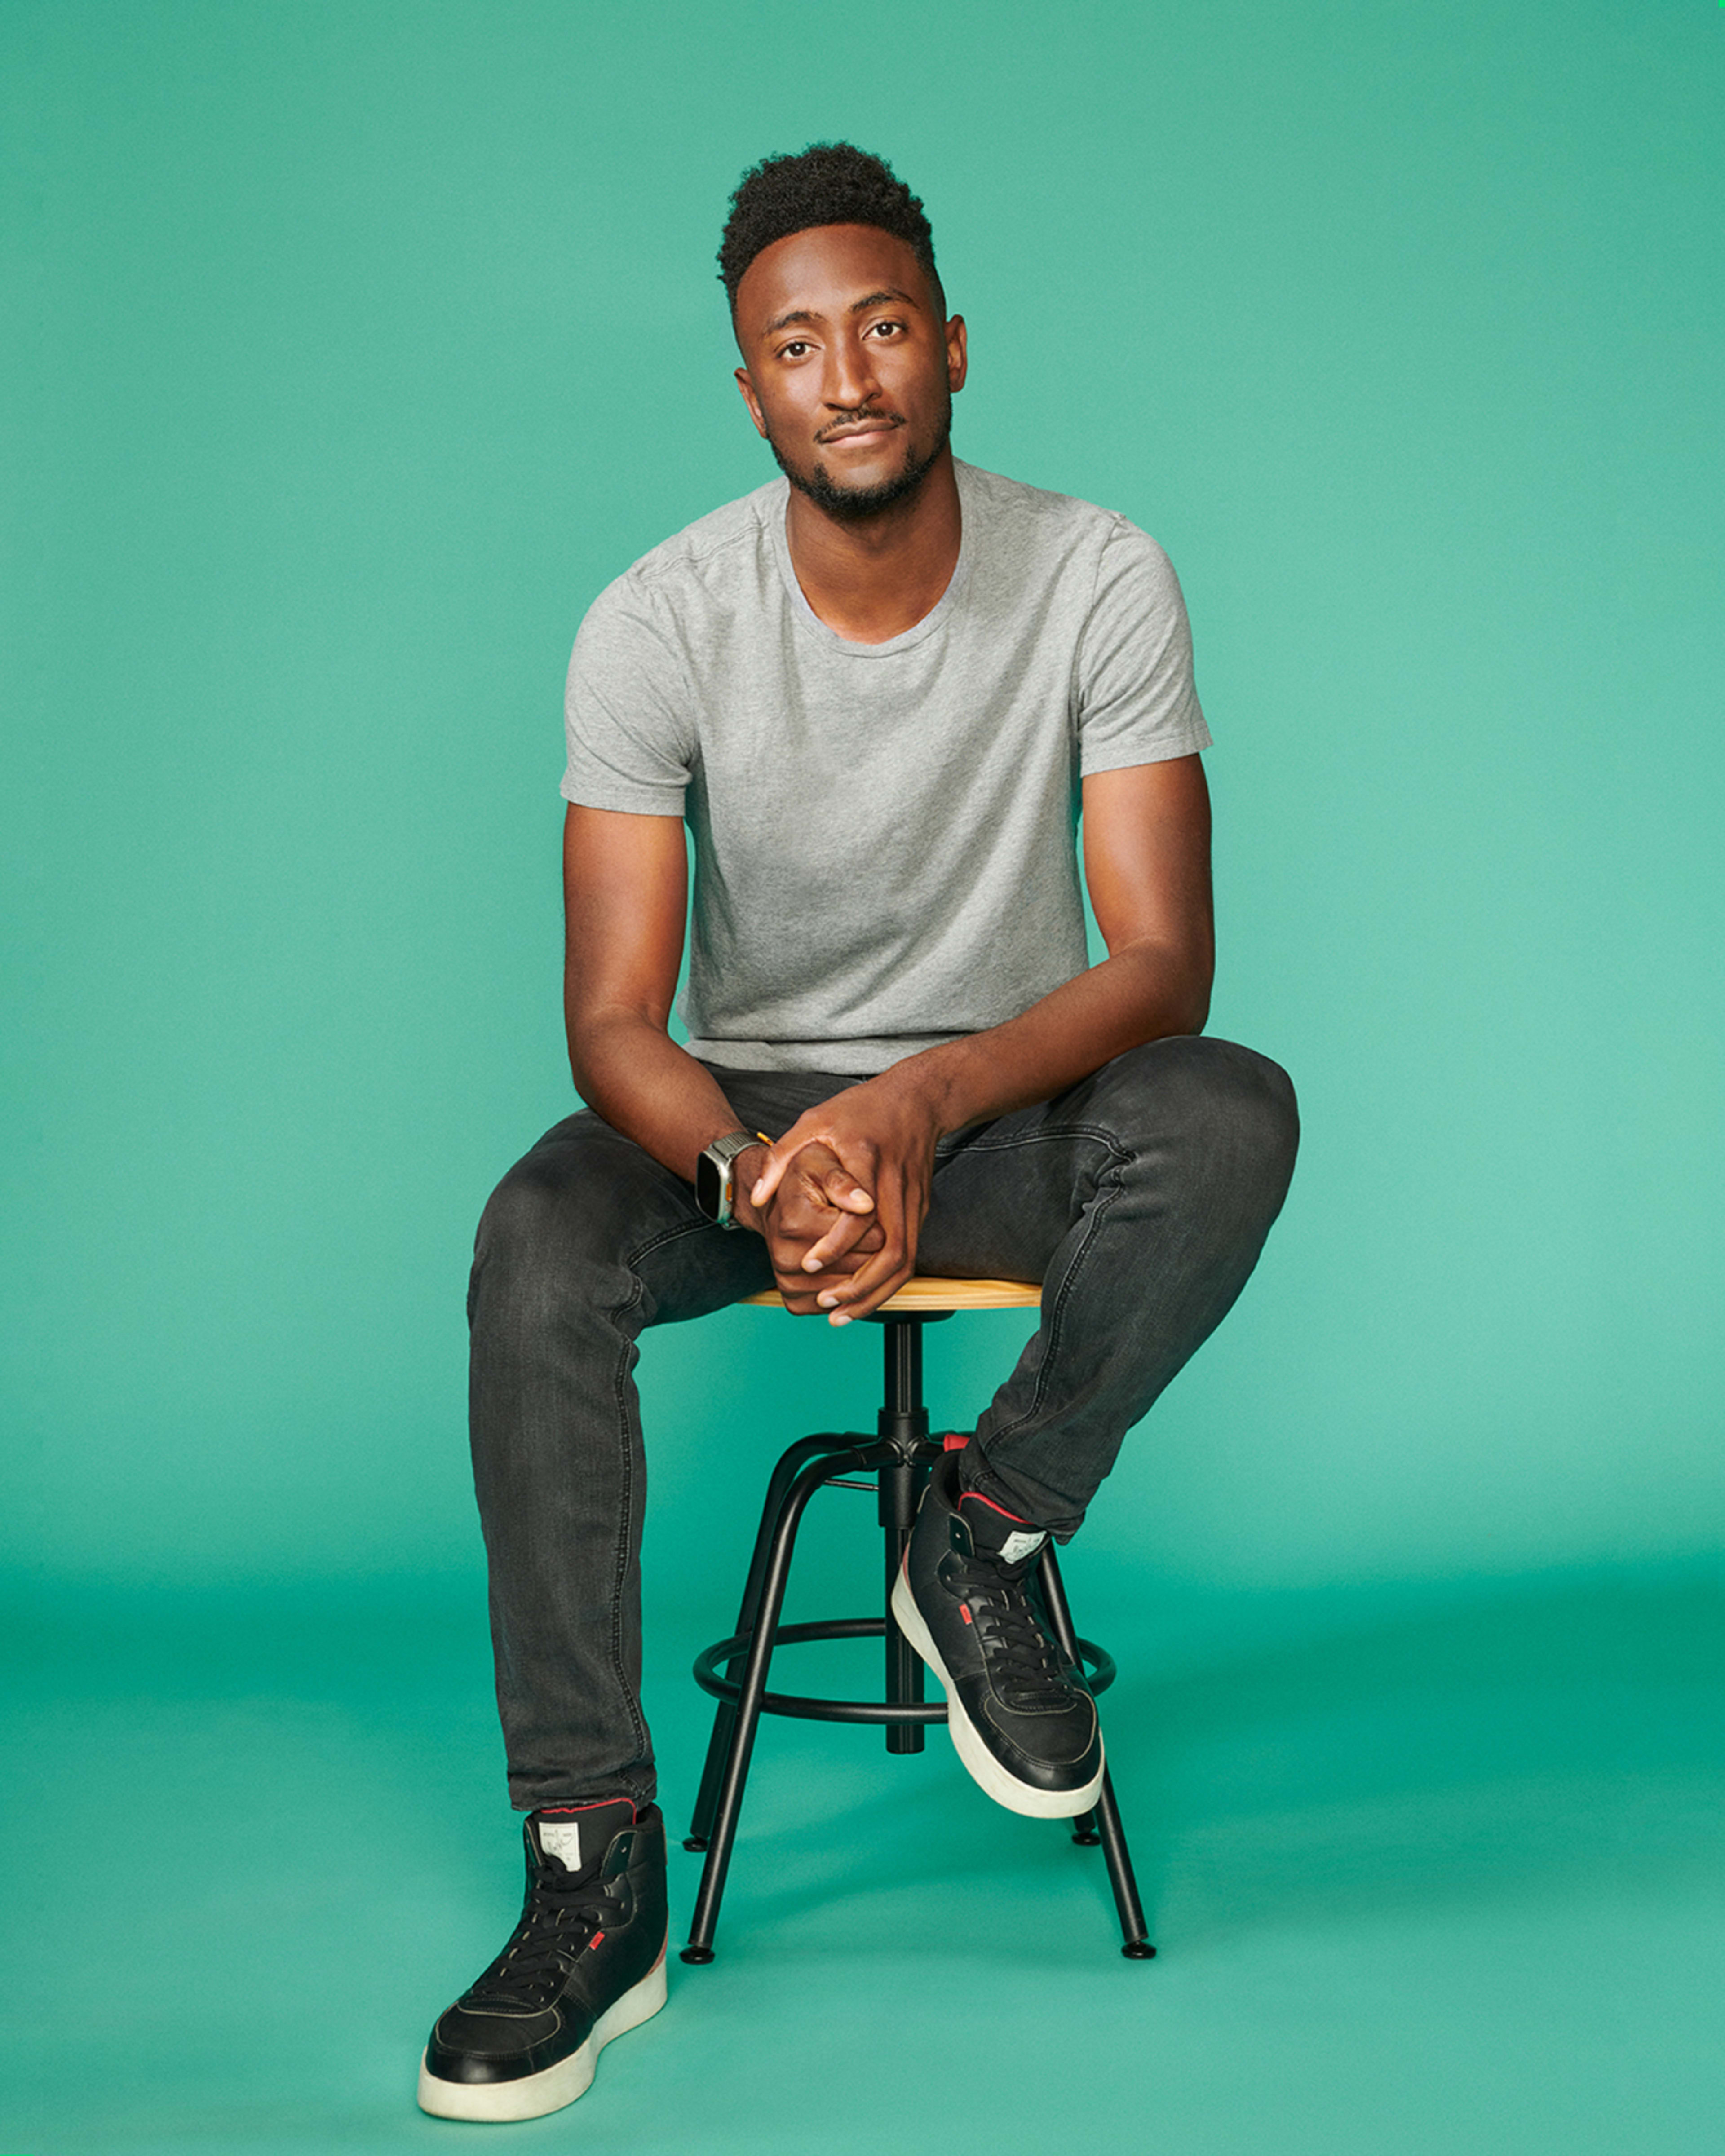 How MKBHD became a BFD: A timeline of Marques Brownlee’s career-making YouTube videos